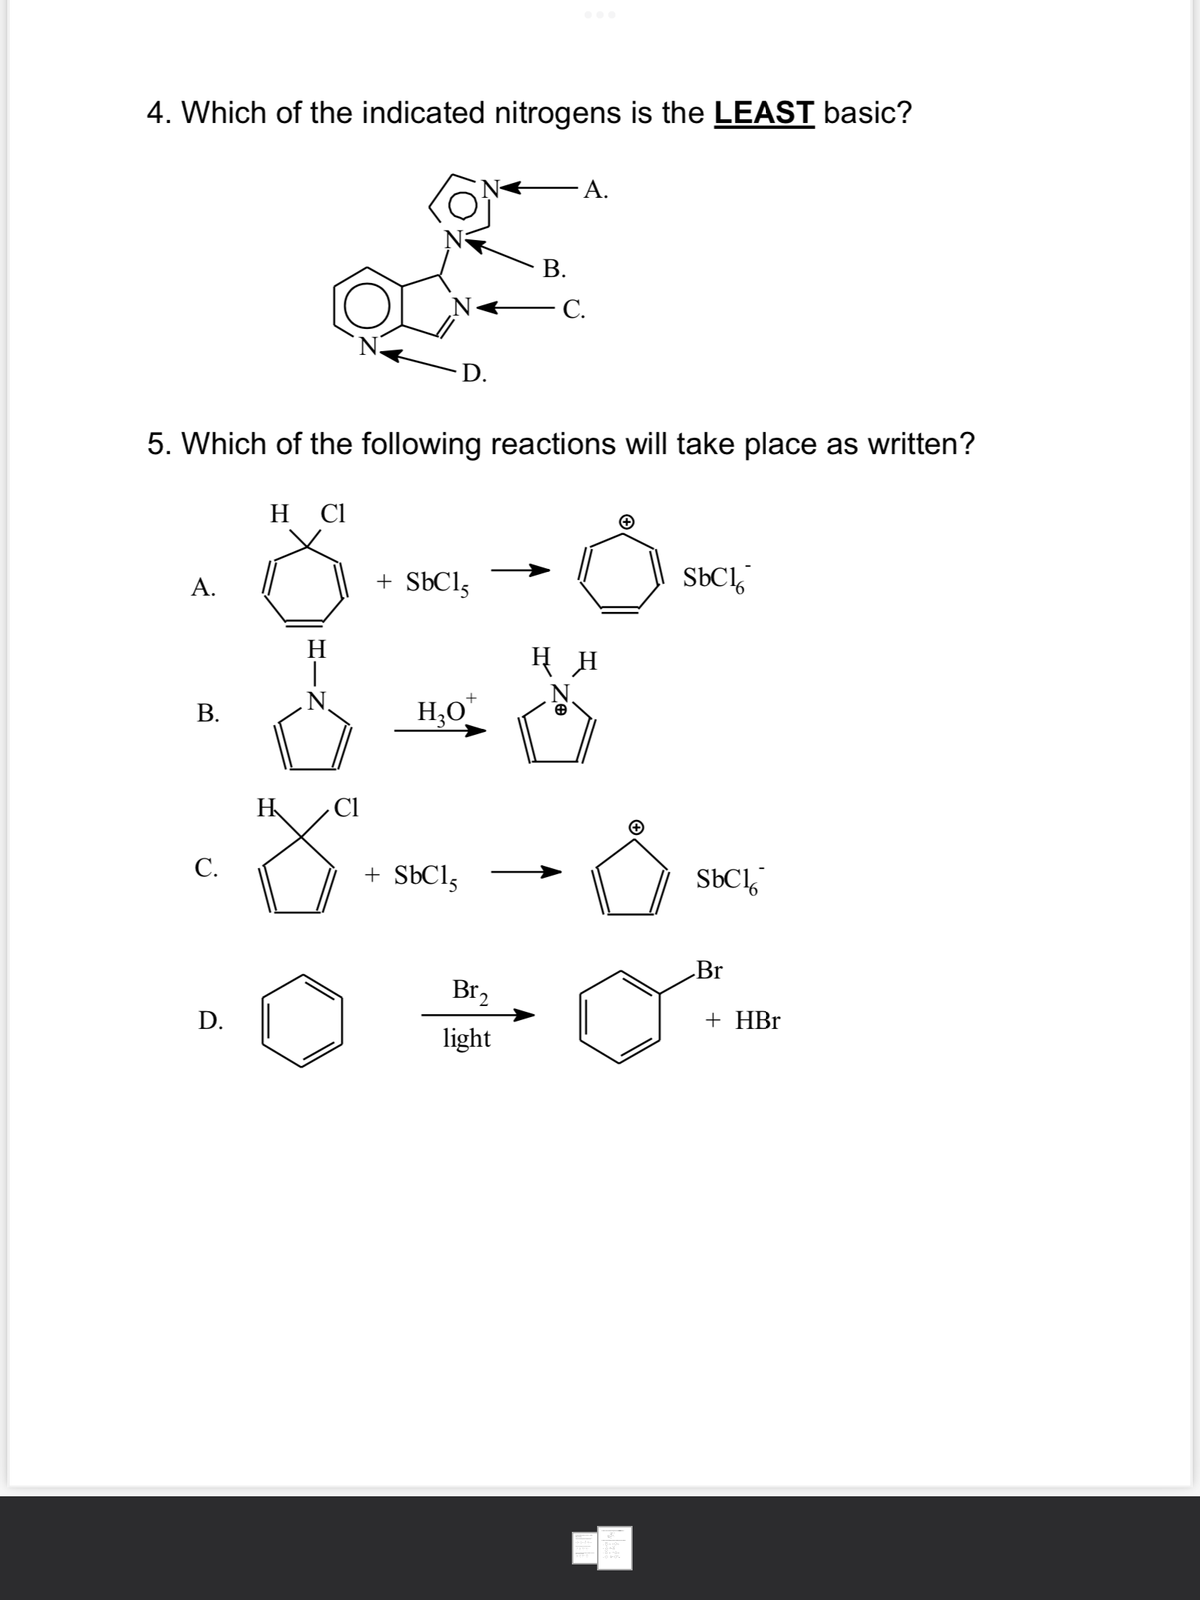 4. Which of the indicated nitrogens is the LEAST basic?
A.
B.
C.
5. Which of the following reactions will take place as written?
D.
HCl
HIN
Cl
H
z
D.
+ SbC15
H₂O
+ SbCl,
B.
Br₂
light
A.
C.
HH
(+
SbCl
SbCl
Br
+ HBr